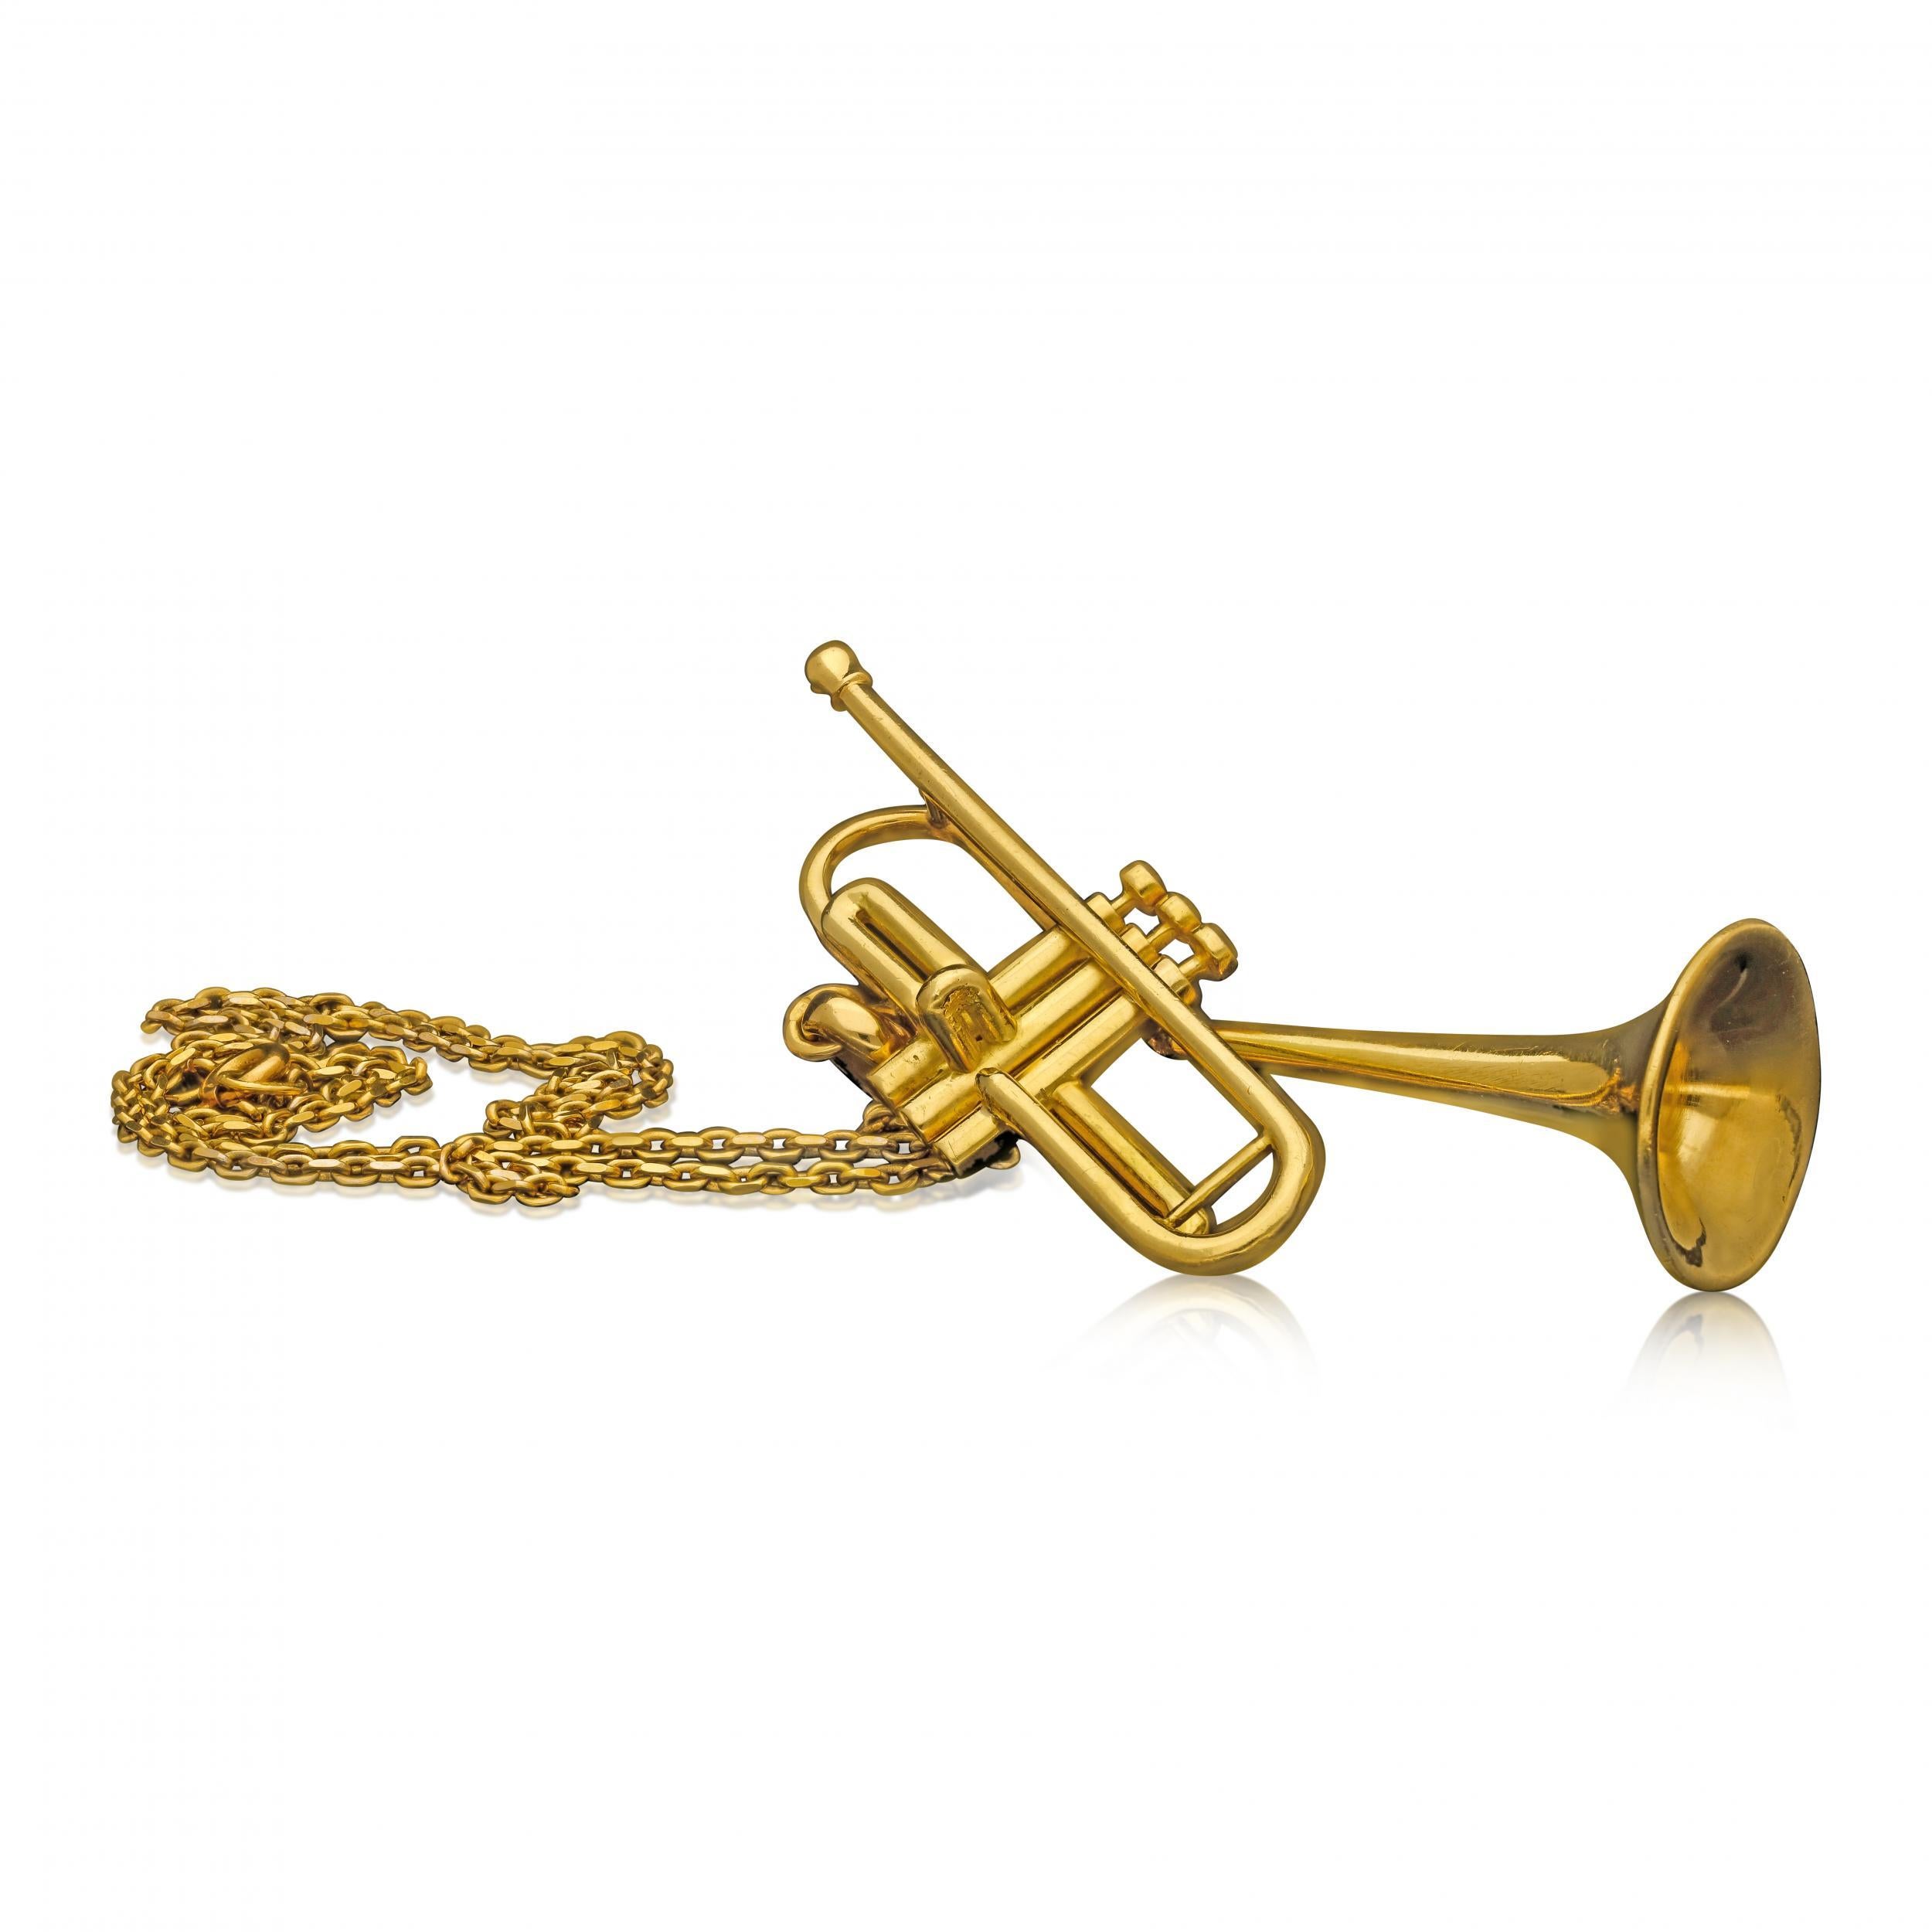 A gold pendant in the form of jazz legend Dizzy Gillespie's iconic 'bent' trumpet by Cartier c.1960s, the pendant realistically modelled in 18ct yellow gold and featuring the bell of the trumpet turned upwards at a 45 degree angle, originally the